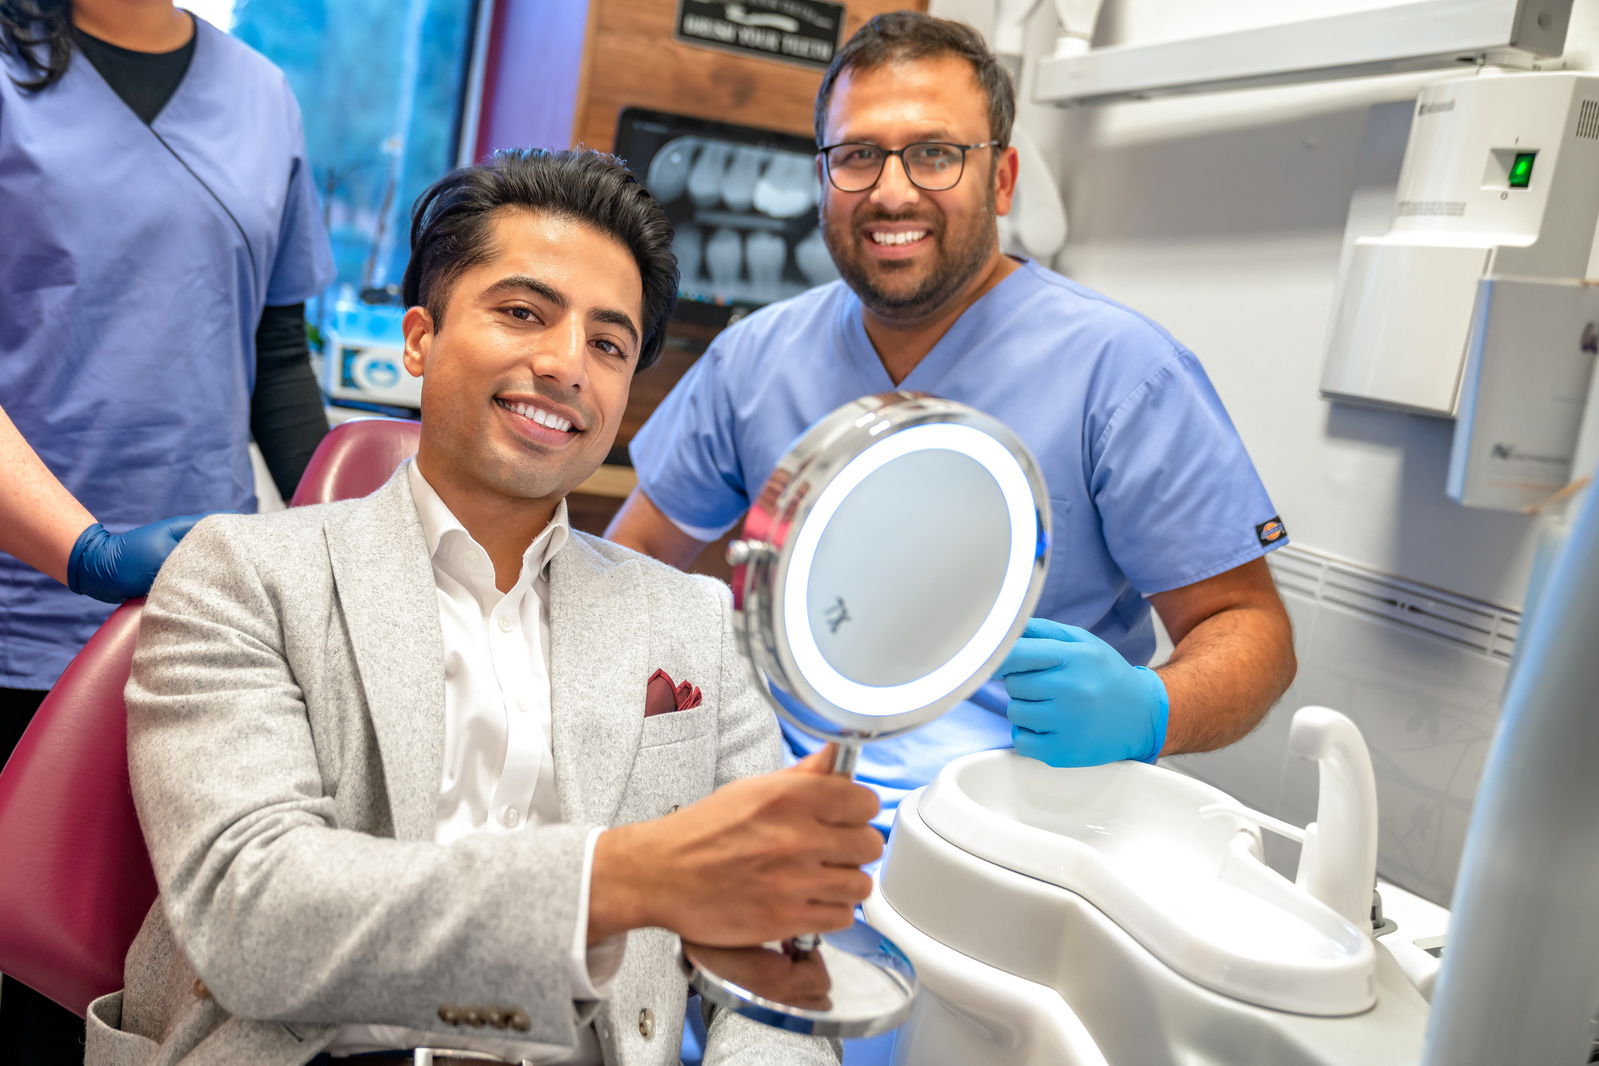 Glasgow Commercial Photographer for My Dentist Scotland - Photography by Nate Cleary